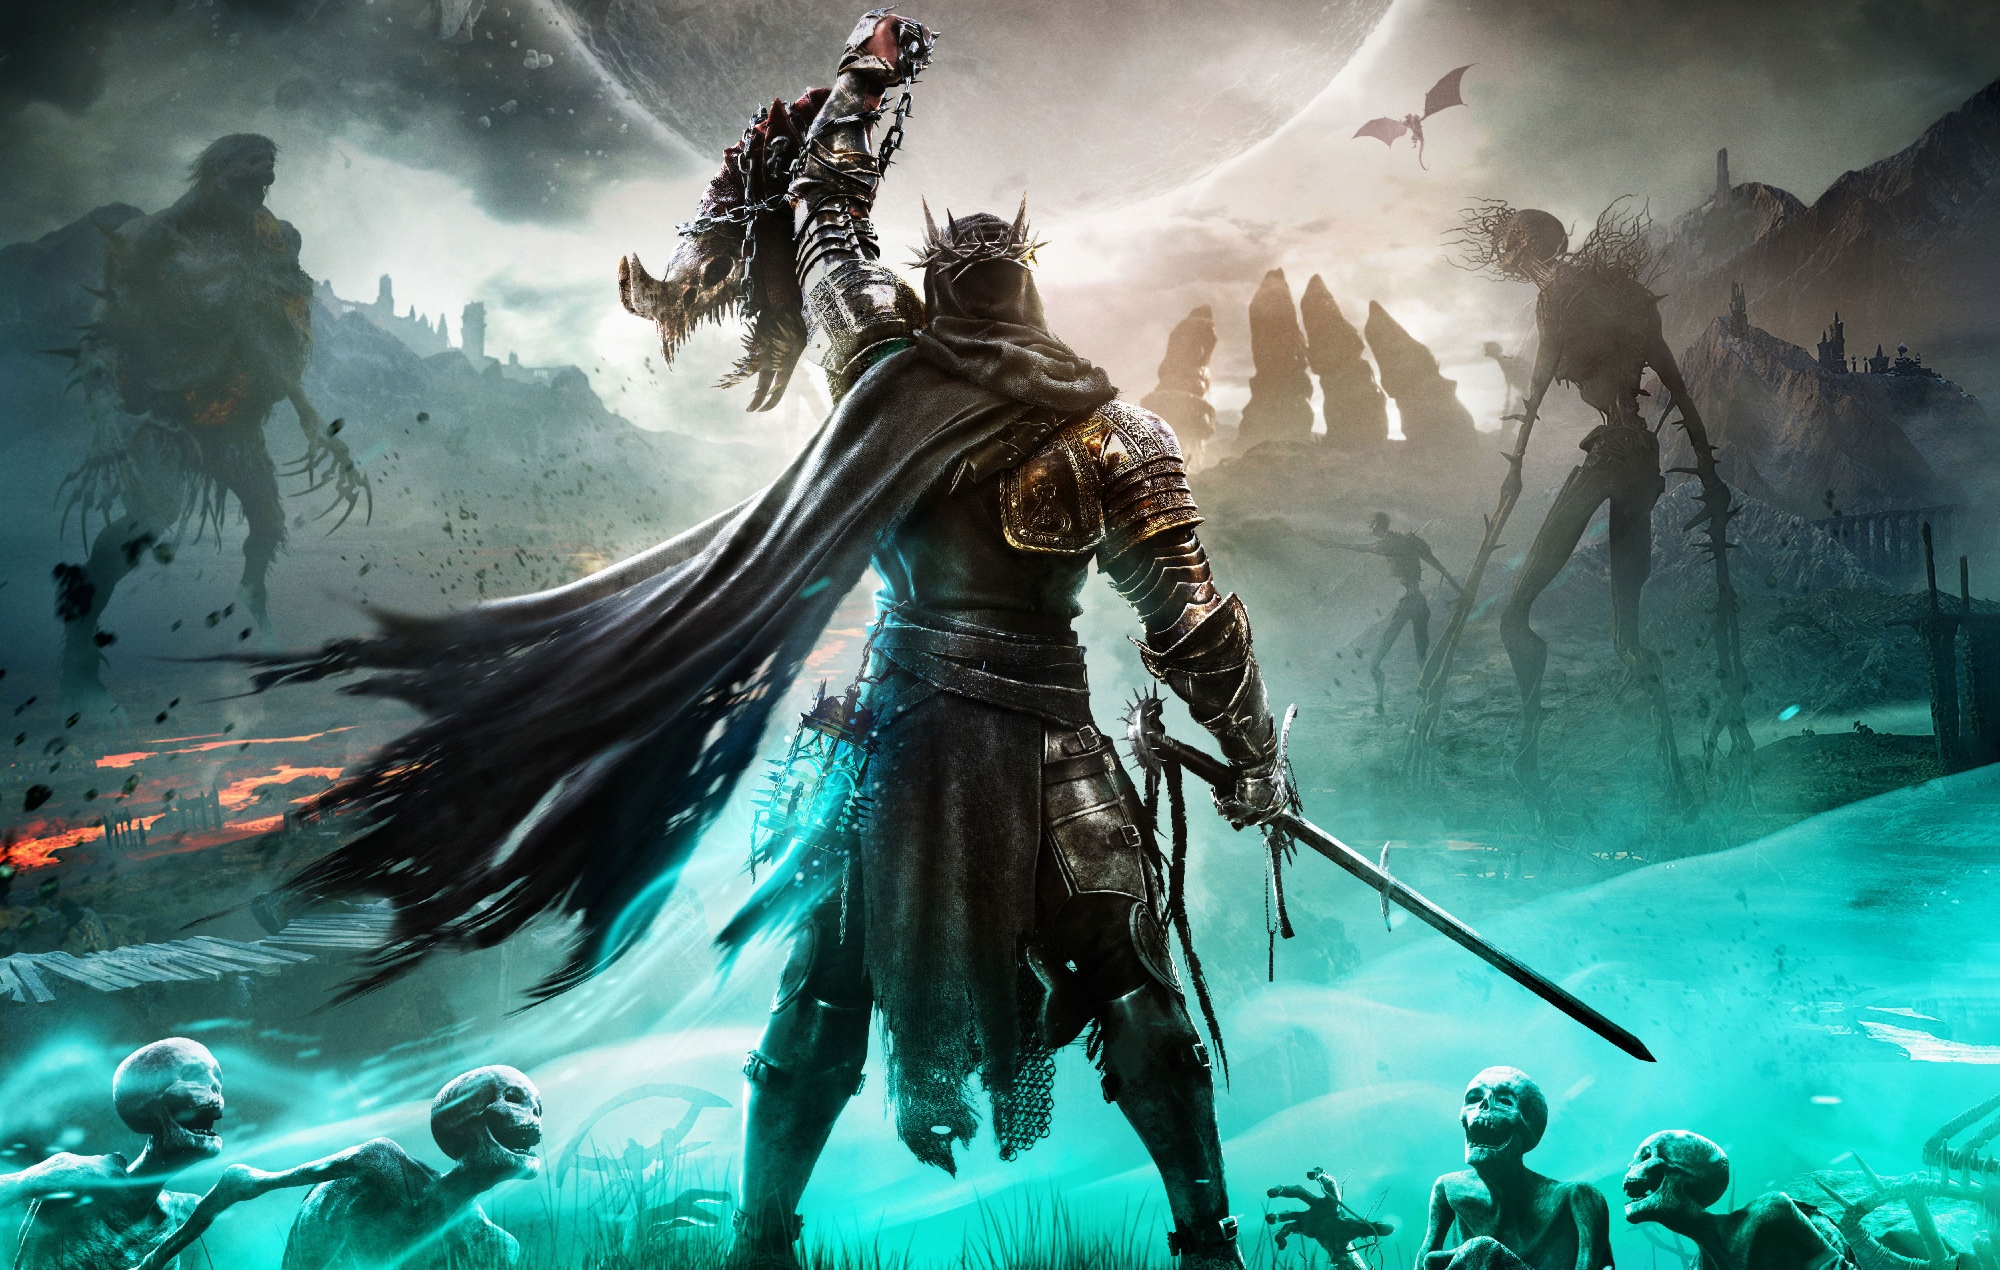 Exclusive: listen to the ‘Lords Of The Fallen’ soundtrack ahead of launch